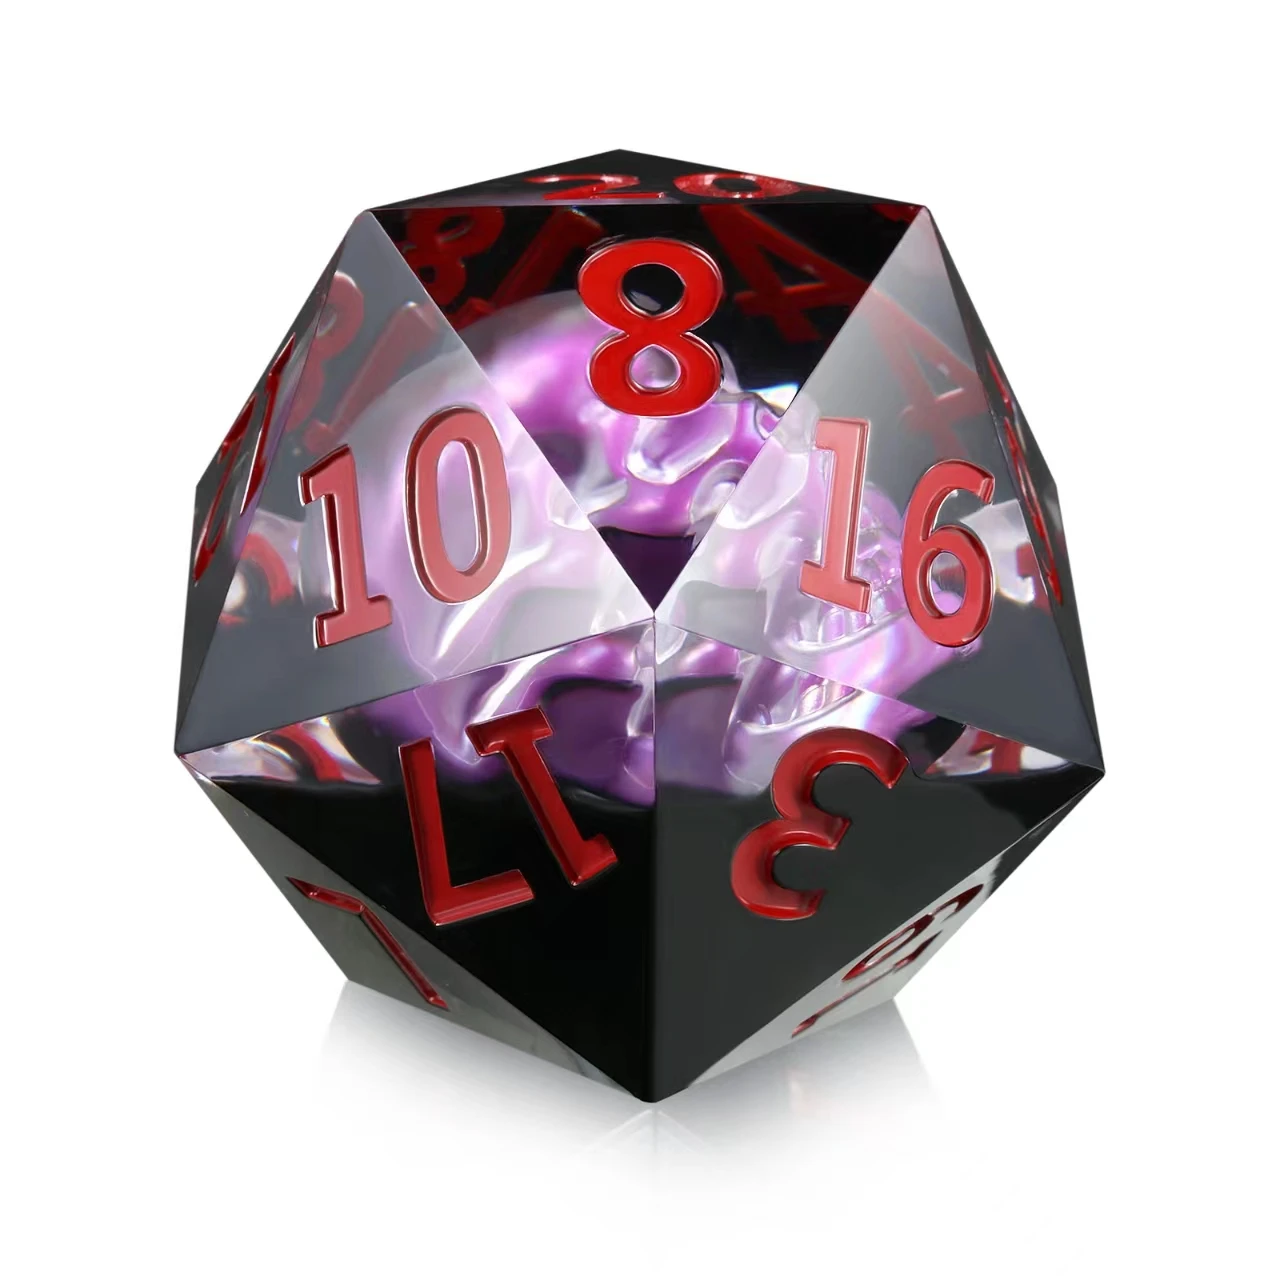 

New Design Role Playing Dice 55mm Giant Custom 20 Sided DND Liquid Dice Resin Sharp Edge Polyhedral D20 Dice for Board game